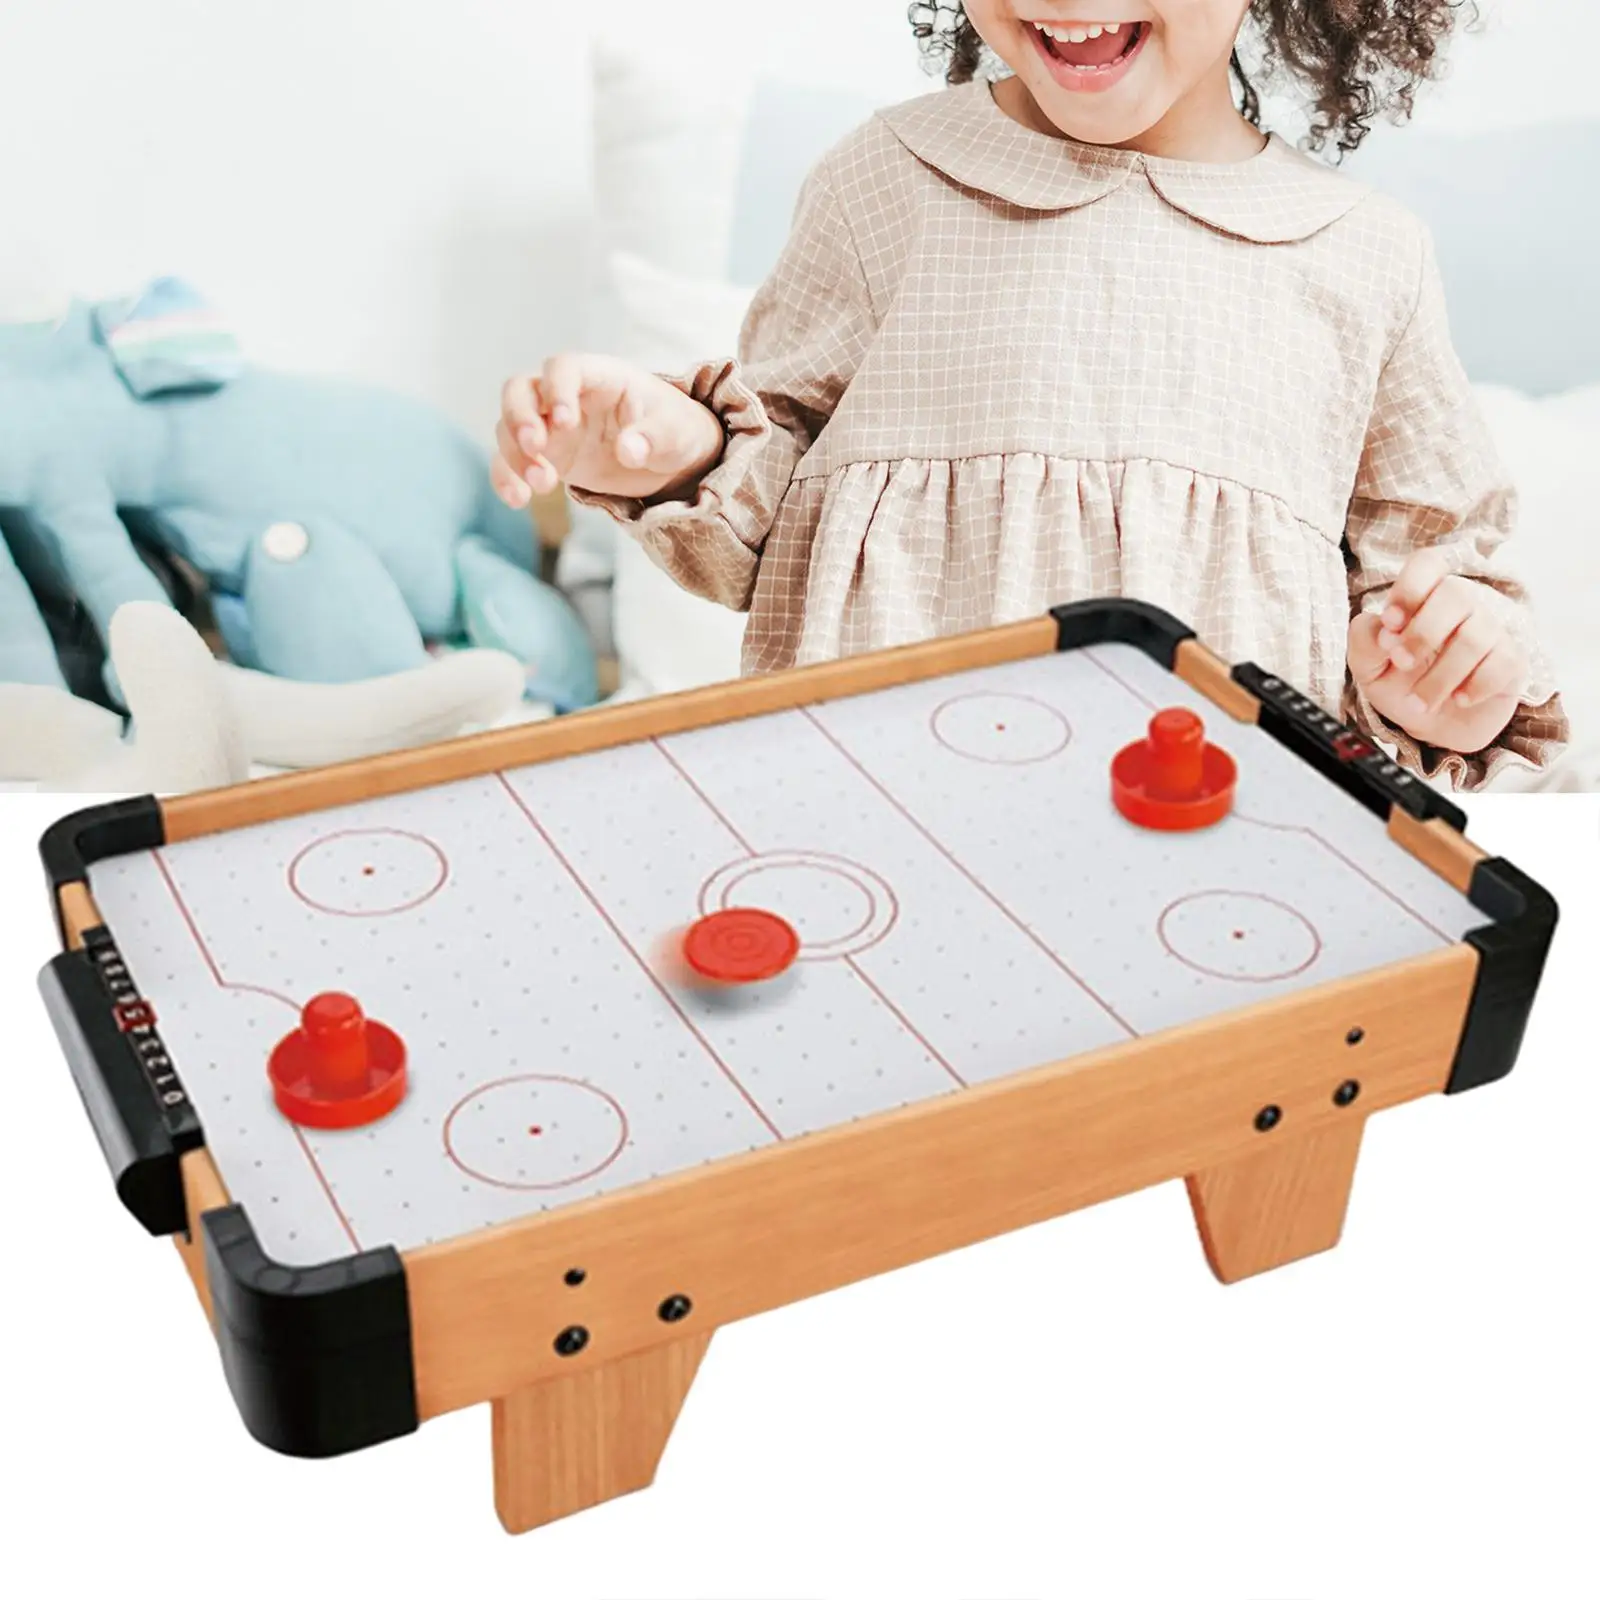 Air Hockey Board Game,Parent Child Interactive Desktop Playing Field,Family Game for Girls Boys Children Toddler Kids